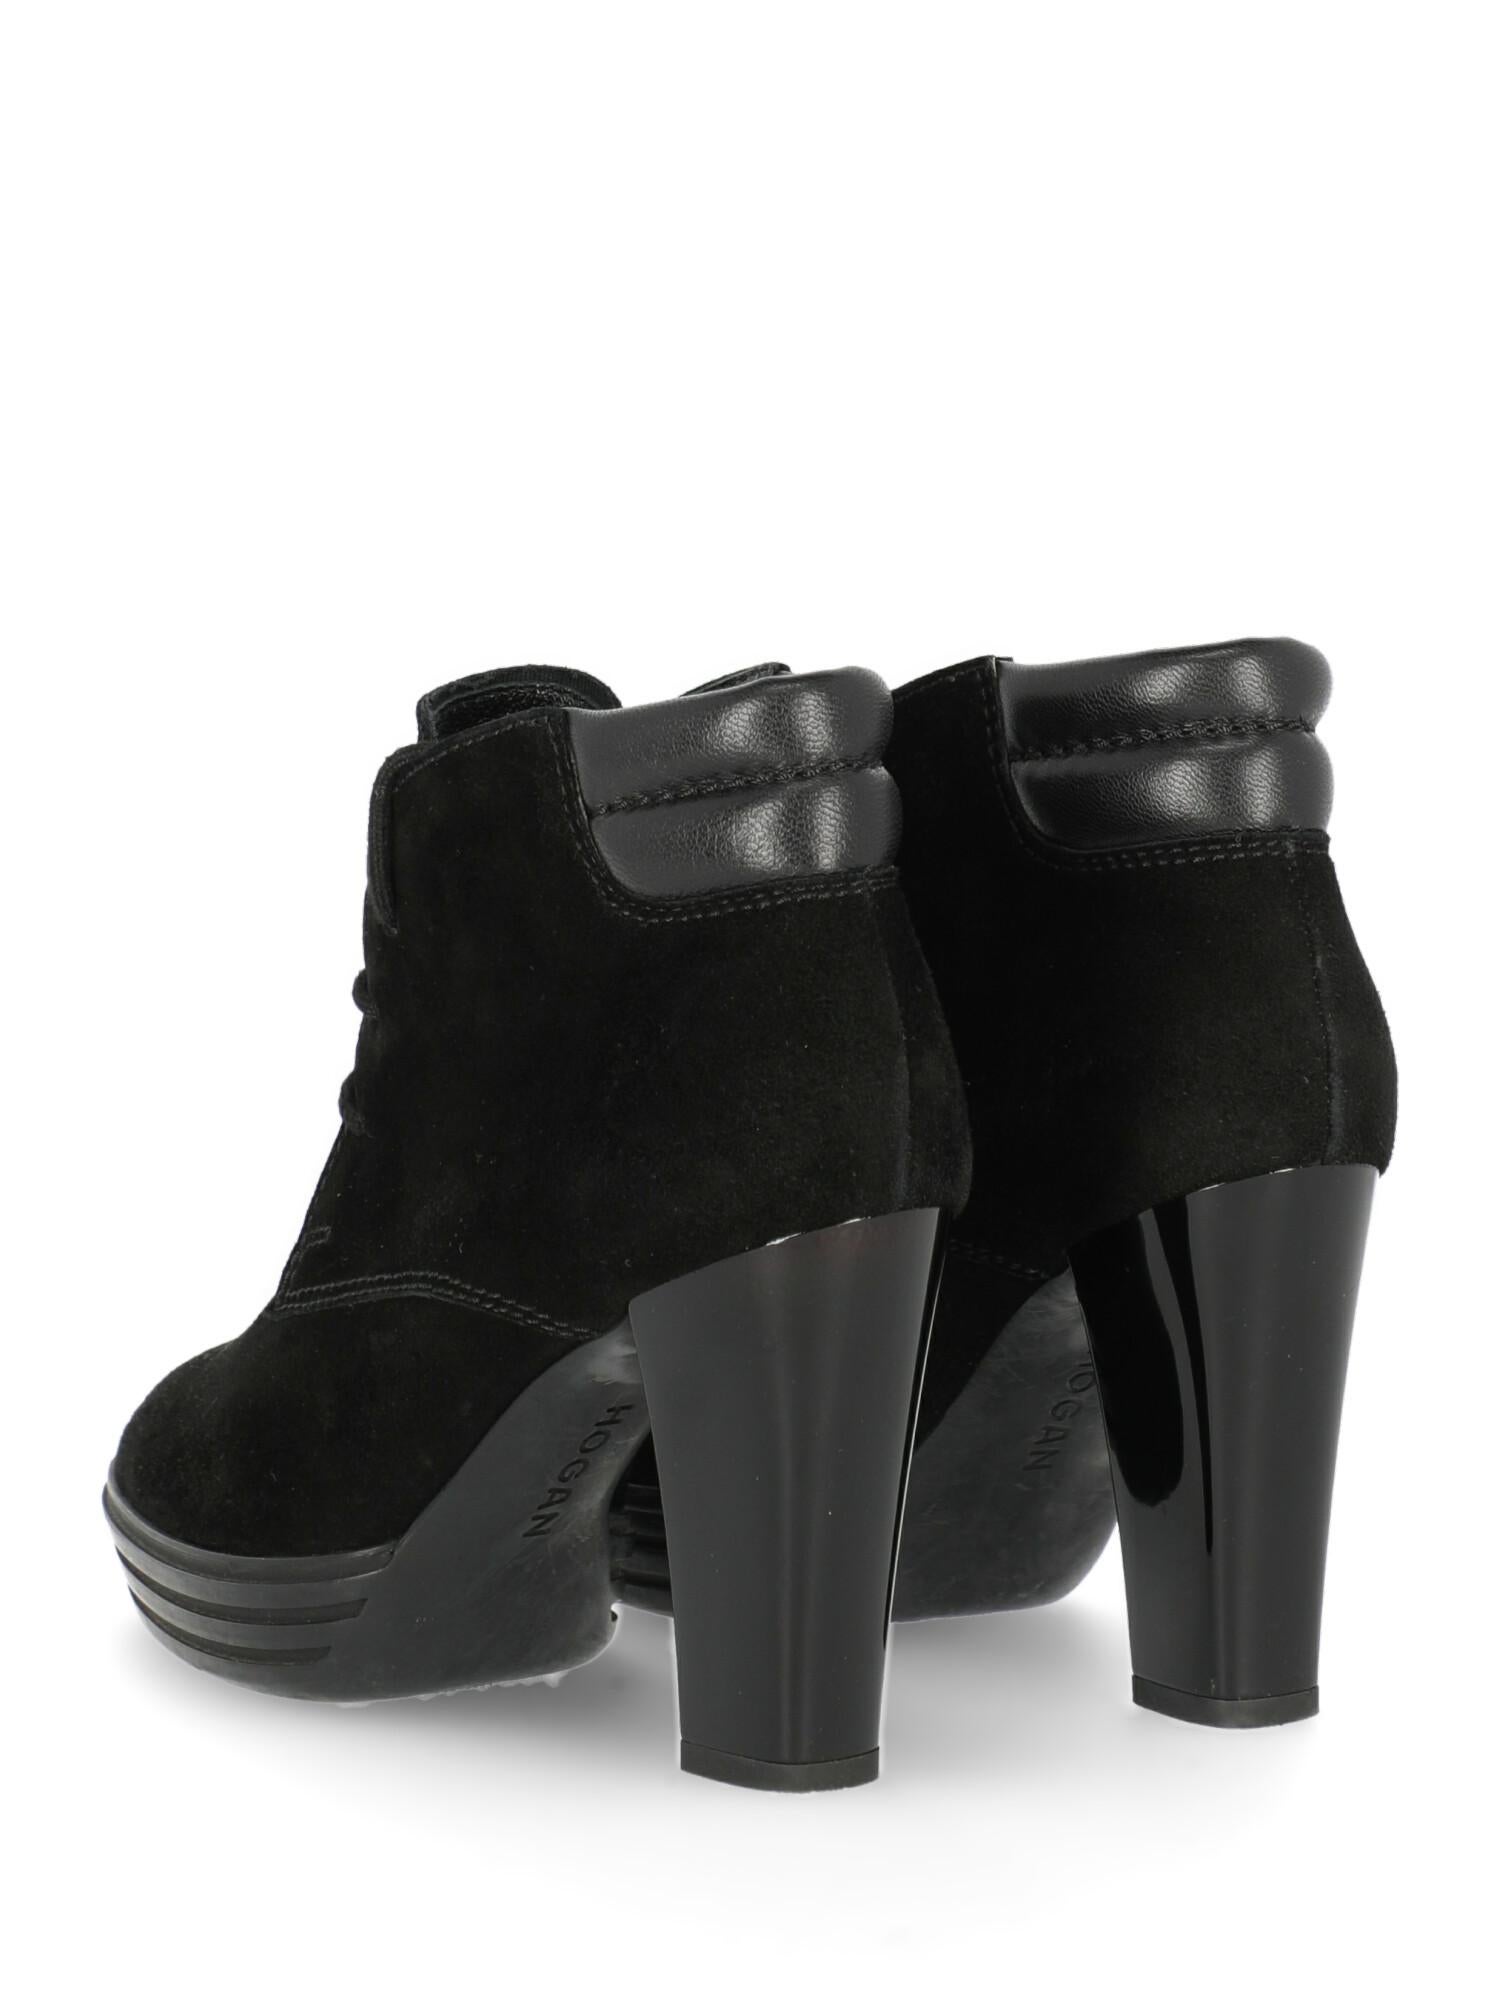 Hogan Woman Ankle boots Black EU 36 In Good Condition For Sale In Milan, IT